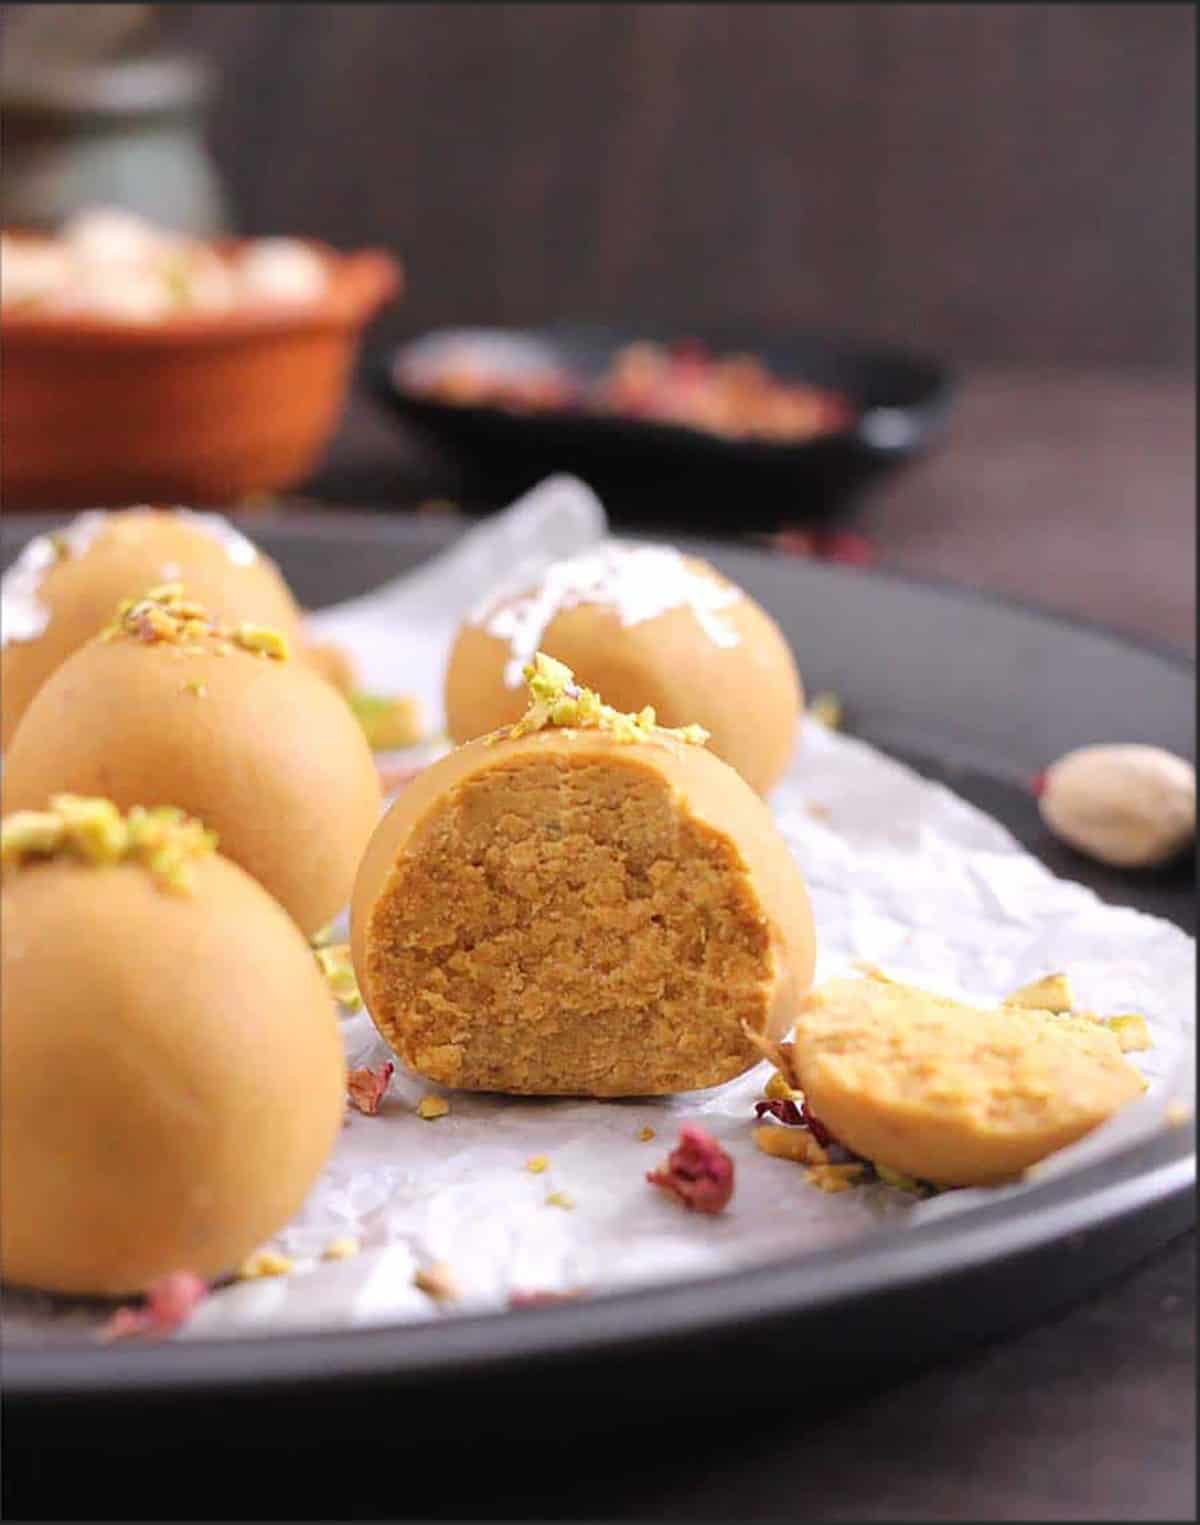 Besan Ladoo is broken into half to show the interior texture of the ladoo.